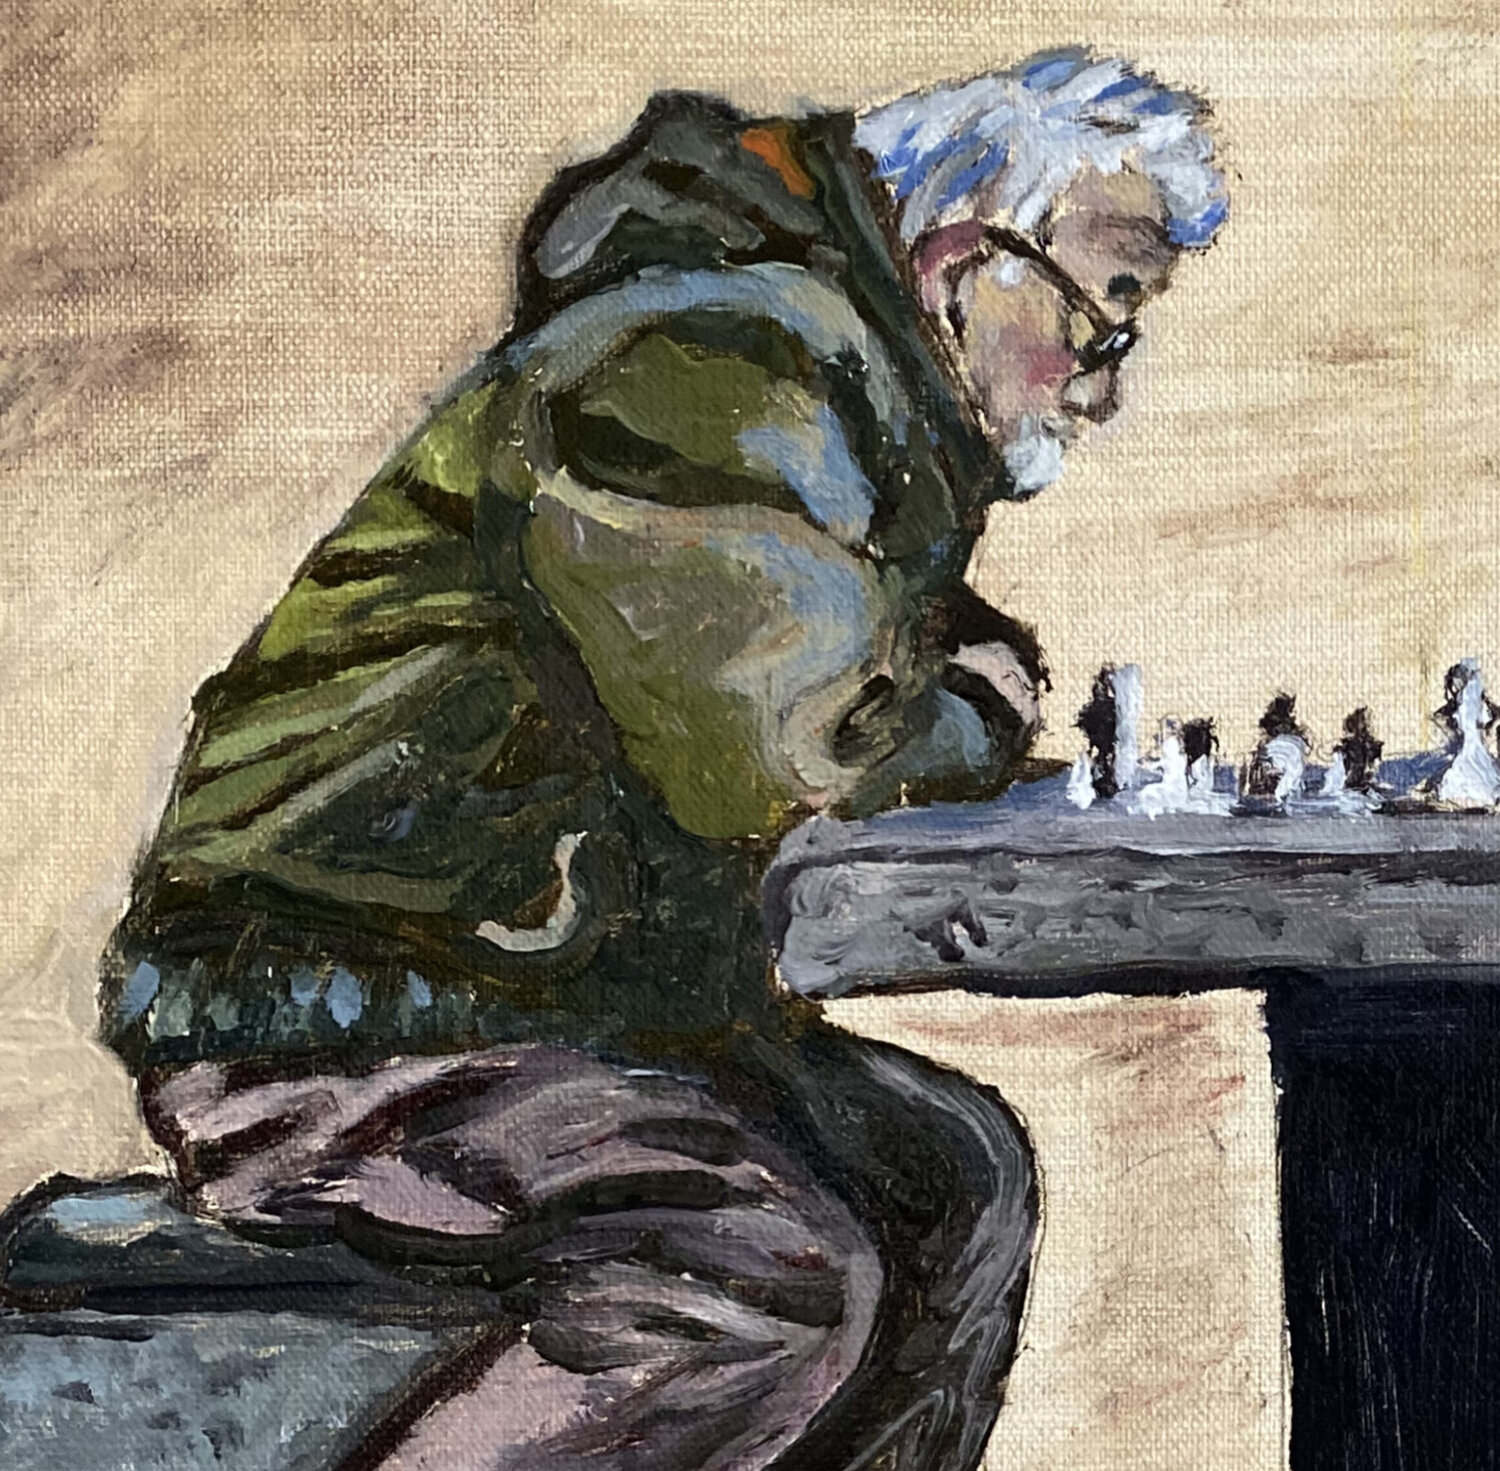 THE CHESS MATCH — Christina Tarkoff Oil Paintings